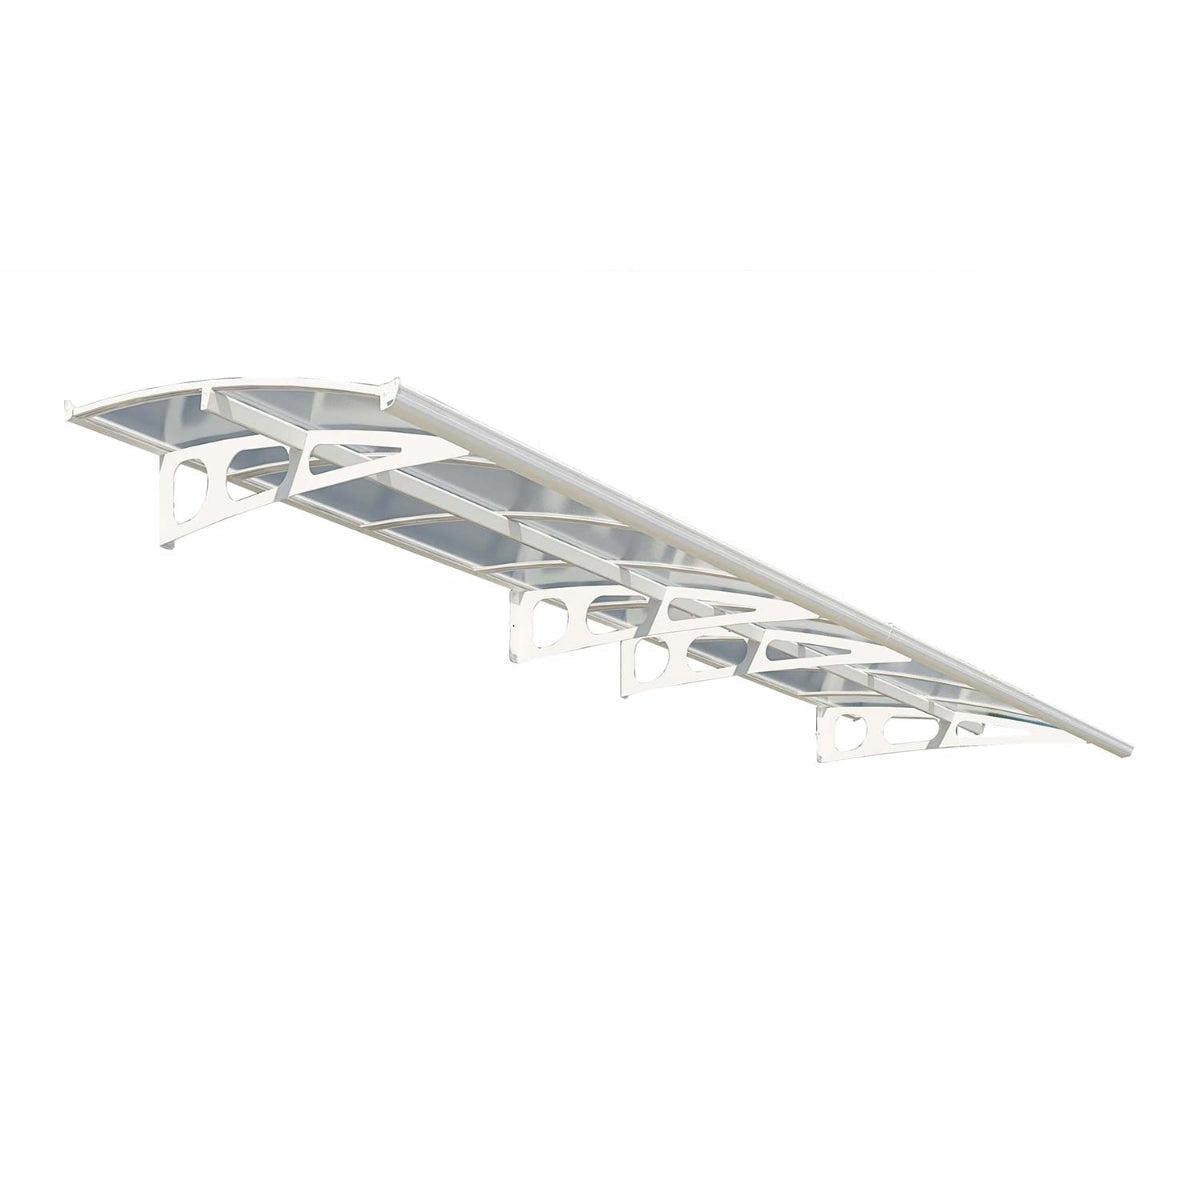 Bordeaux 2230 Door Awning Clear Panel | Palram-Canopia - Delightful Yard